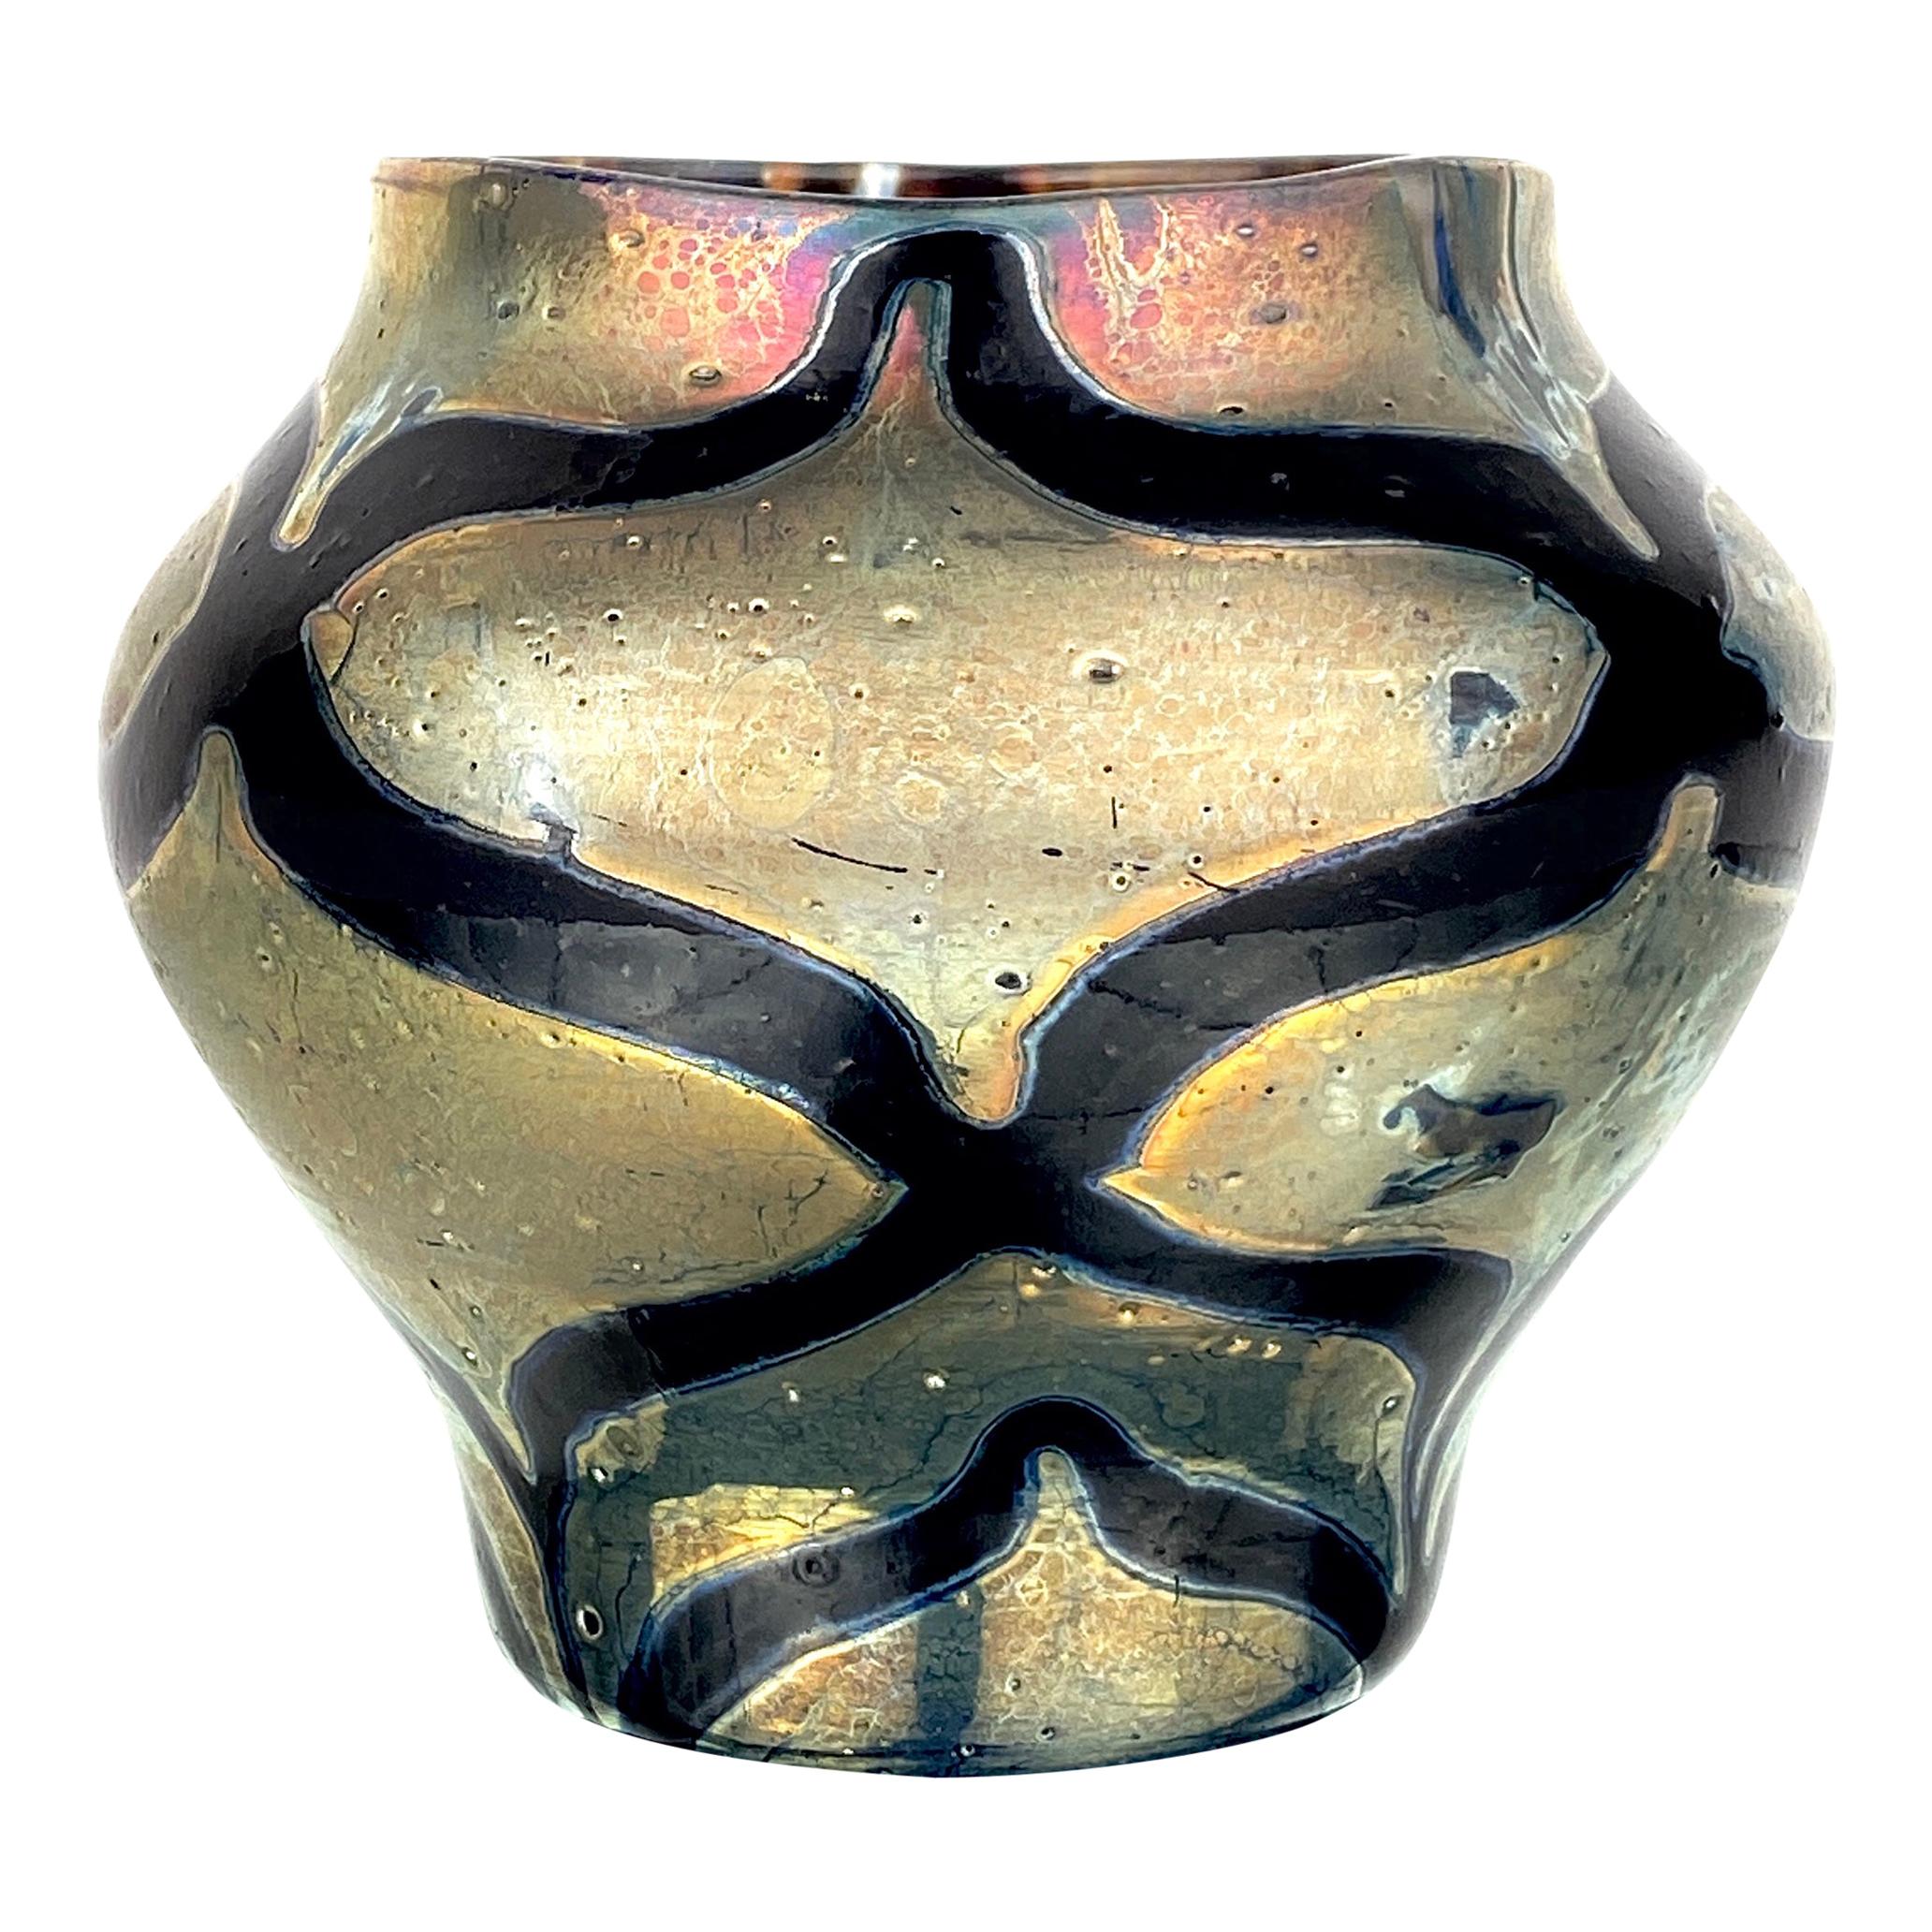 Art Nouveau Tiffany Favrile Decorated Cypriote Vase by, Tiffany Studios